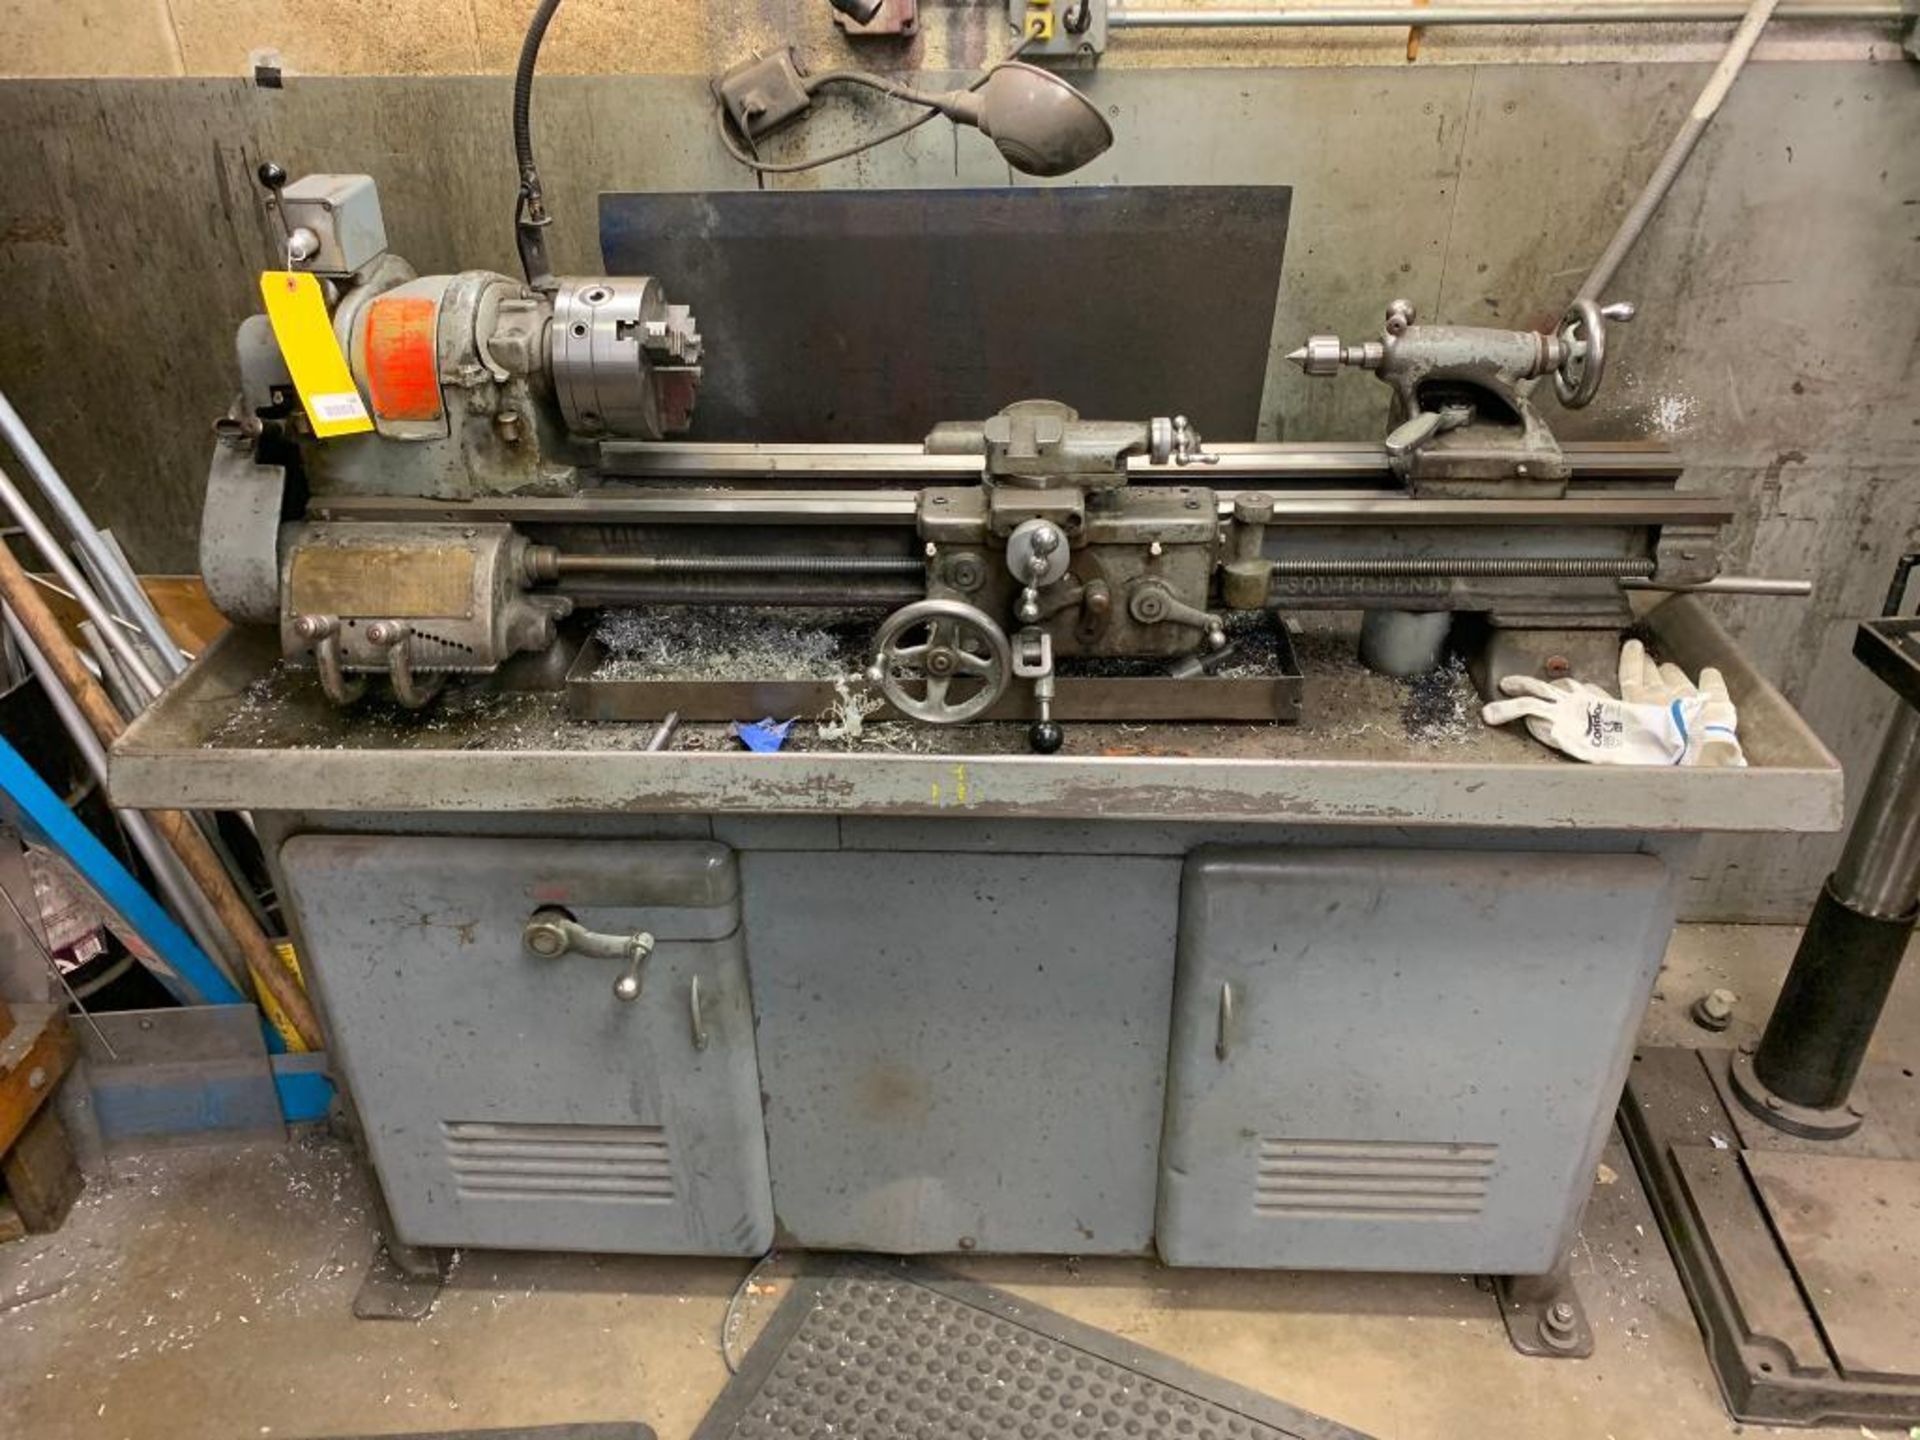 South Bend Precision Lathe, 4-1/2' Bed, 6" 3-Jaw Chuck, Cross-Slide Tailstock w/ Center, S/N CL-187R